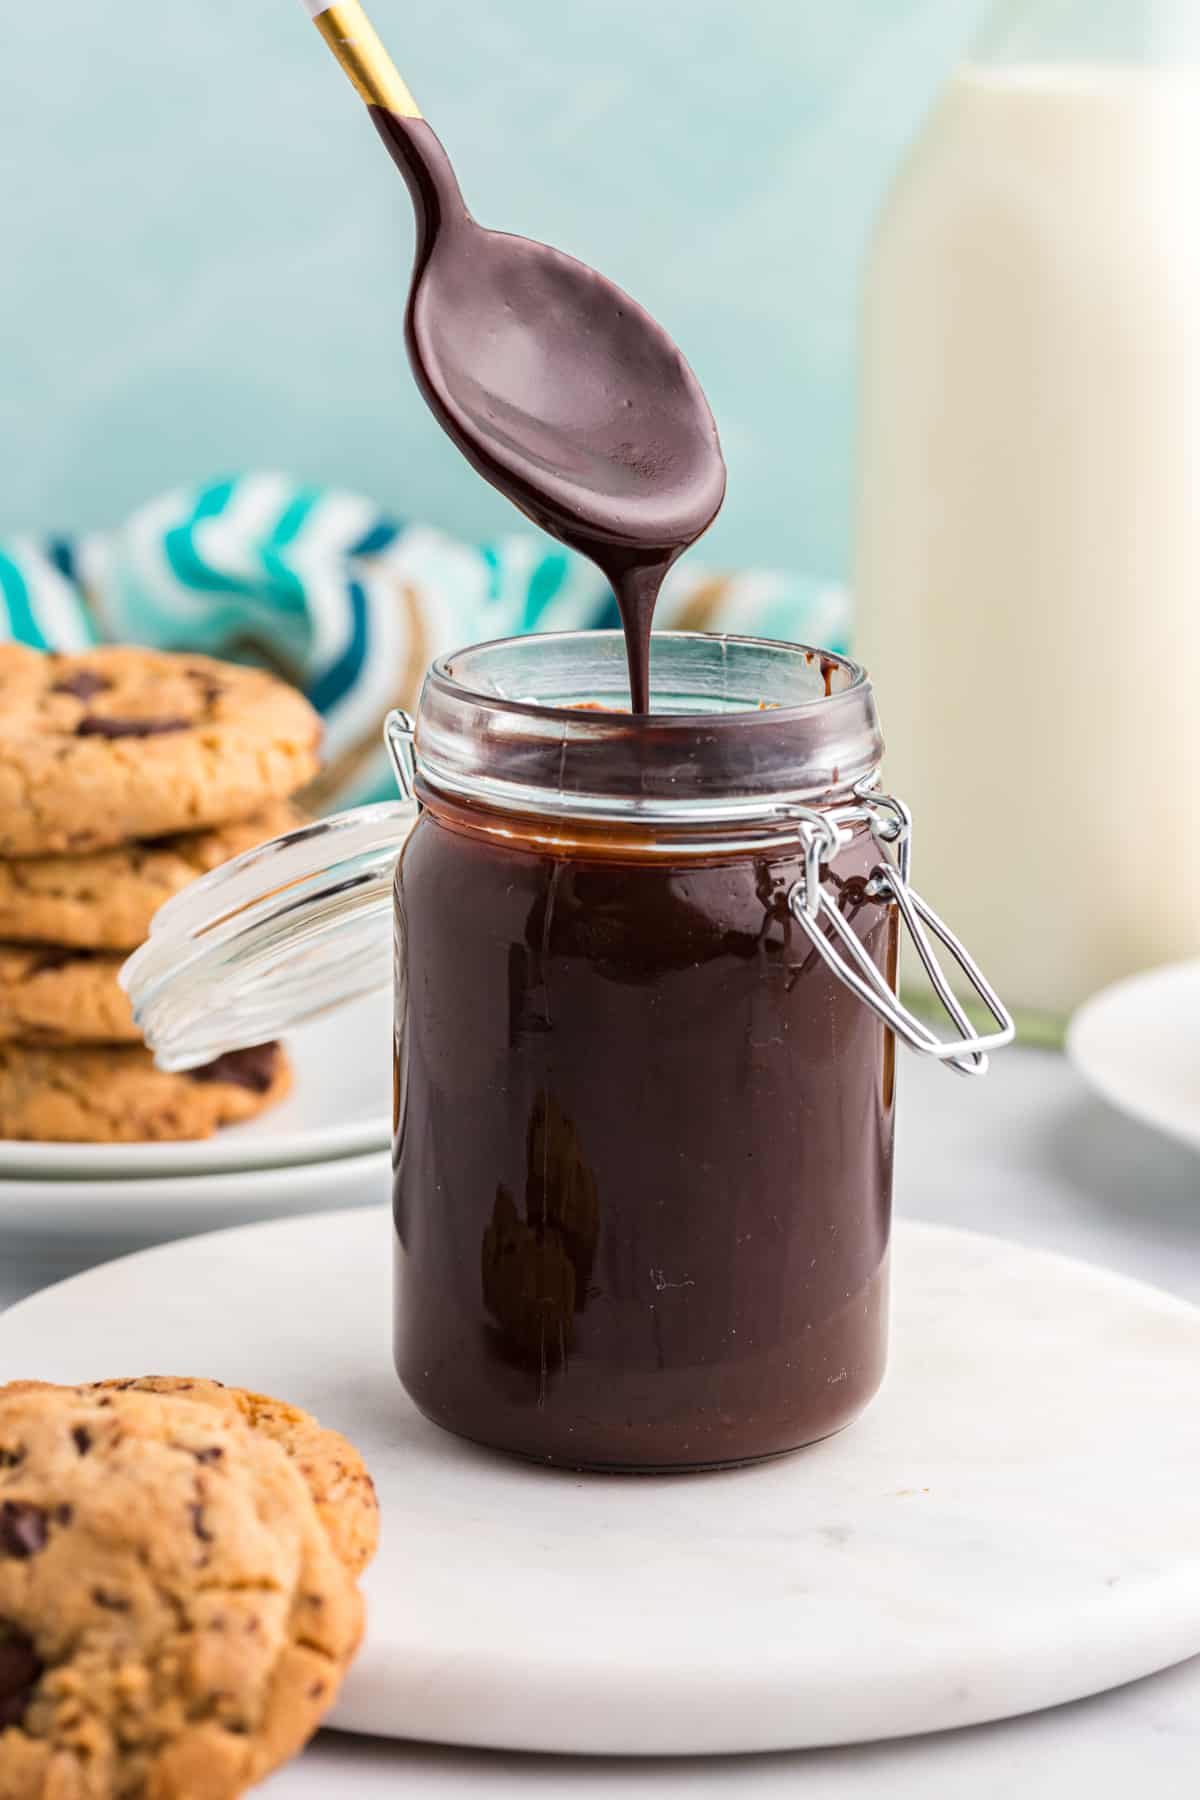 A spoon is drizzling hot fudge sauce into a full jar.